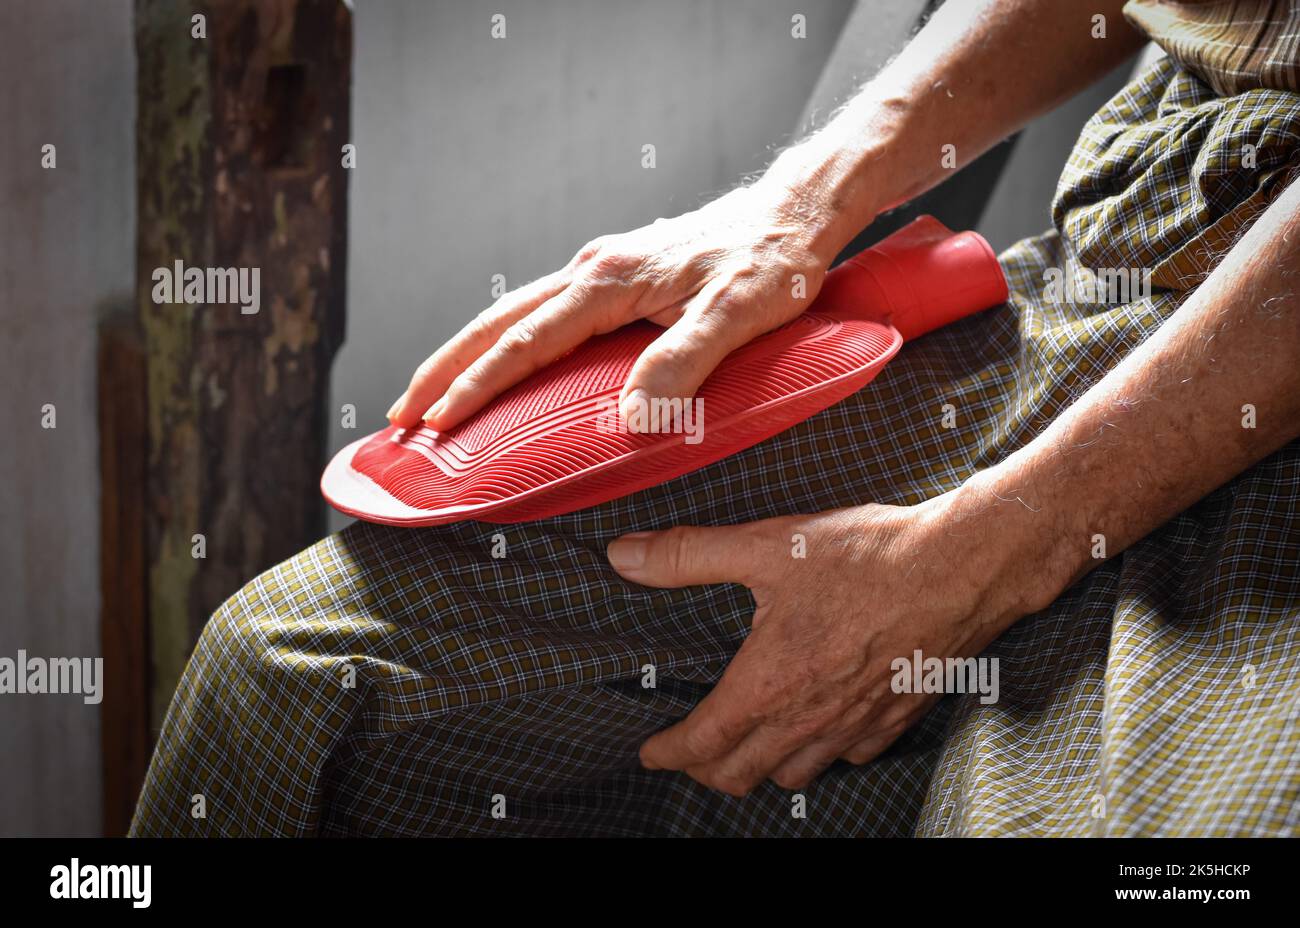 Thigh pain in Asian senior male patient. Concept of muscle sprain, sciatica or sciatic nerve pain. Therapy by rubber hot water bag. Stock Photo